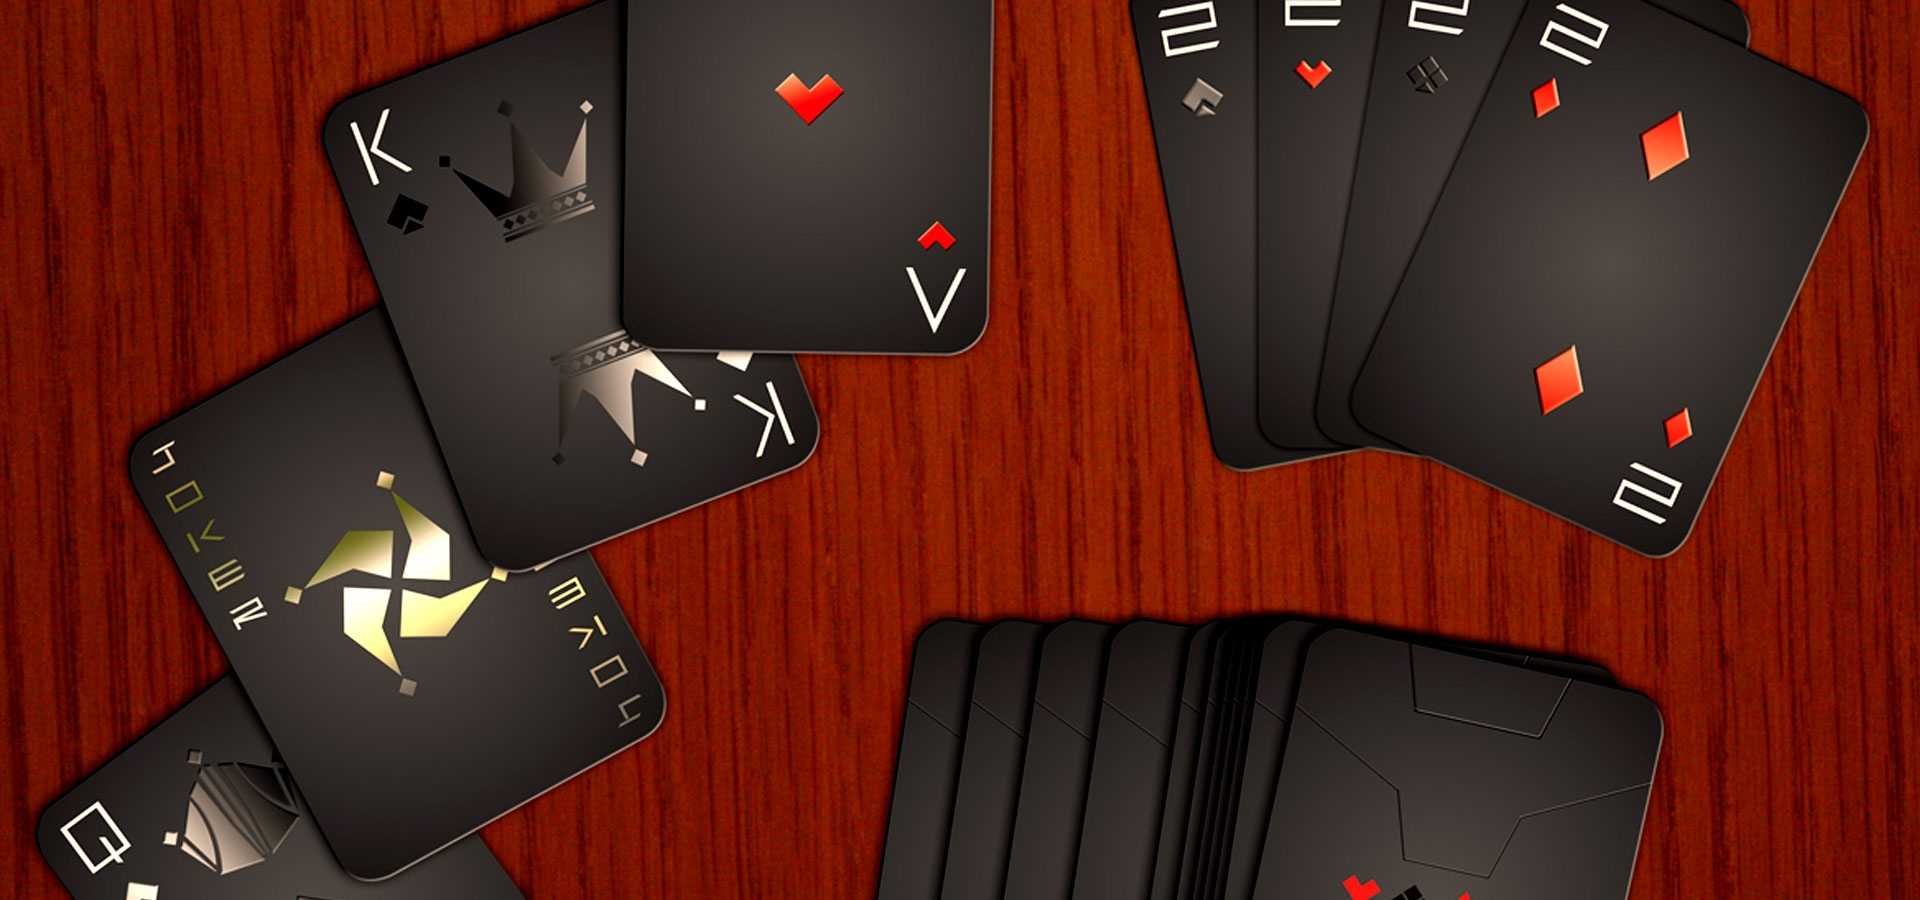 22+ Playing Card Designs | Free & Premium Templates Intended For Playing Card Template Illustrator